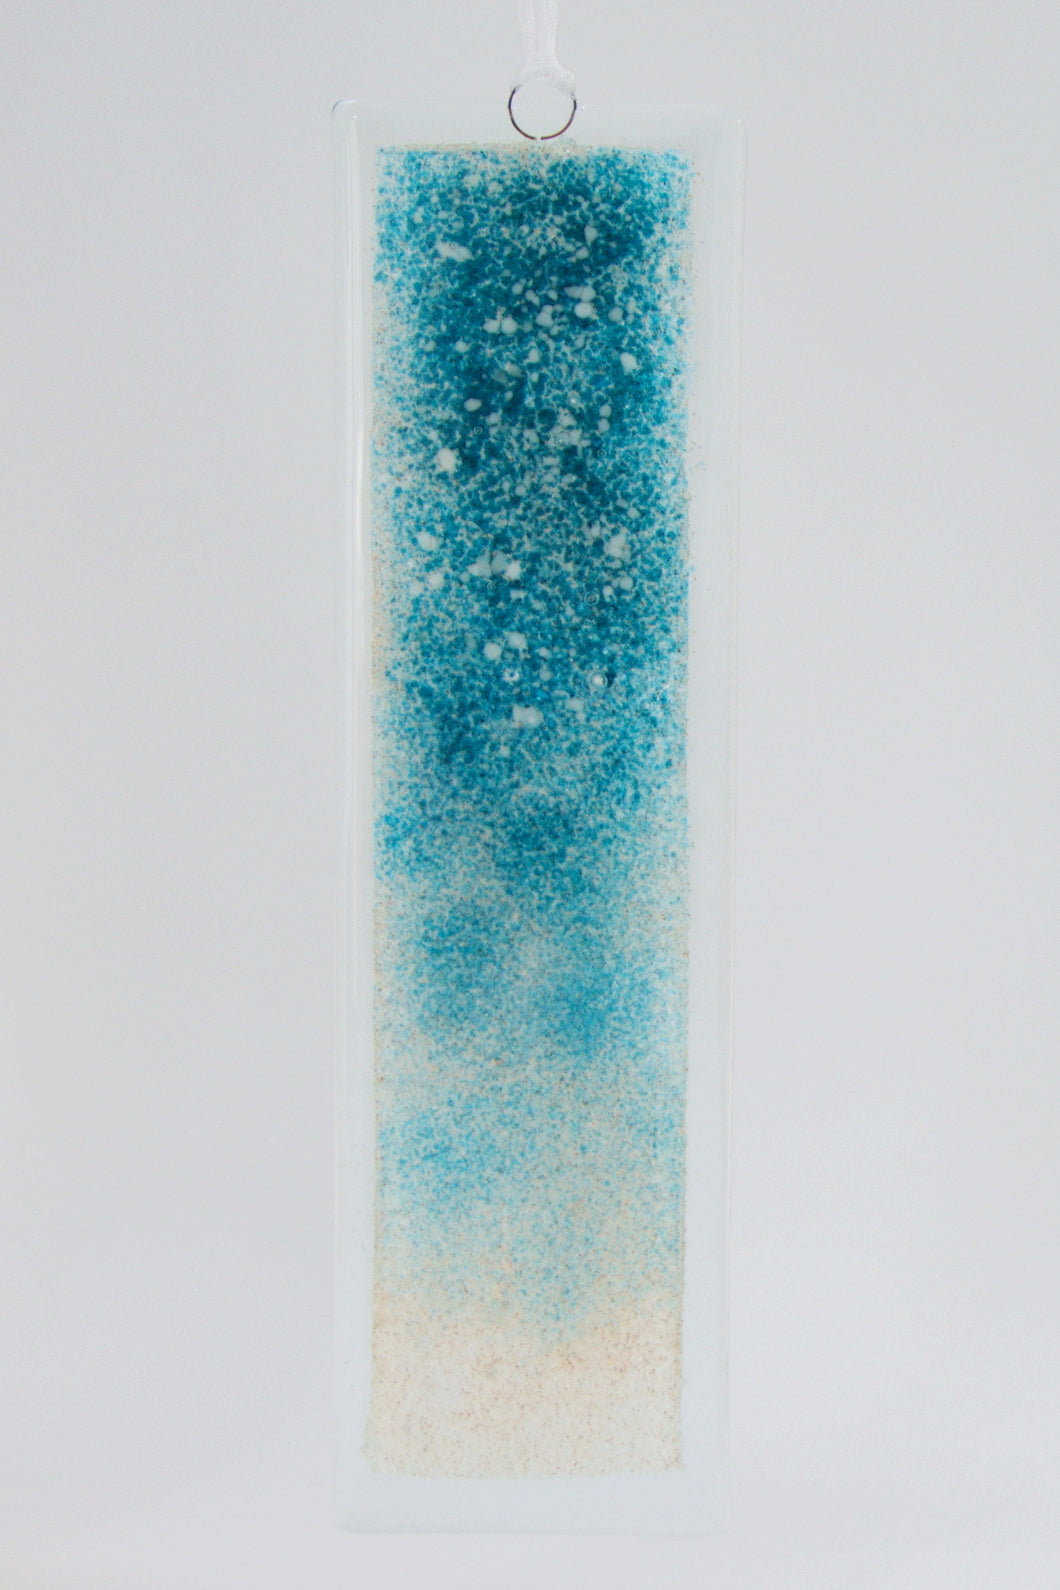 Long Ocean fused glass hanging by Flow Glass Orkney Islands Scotland